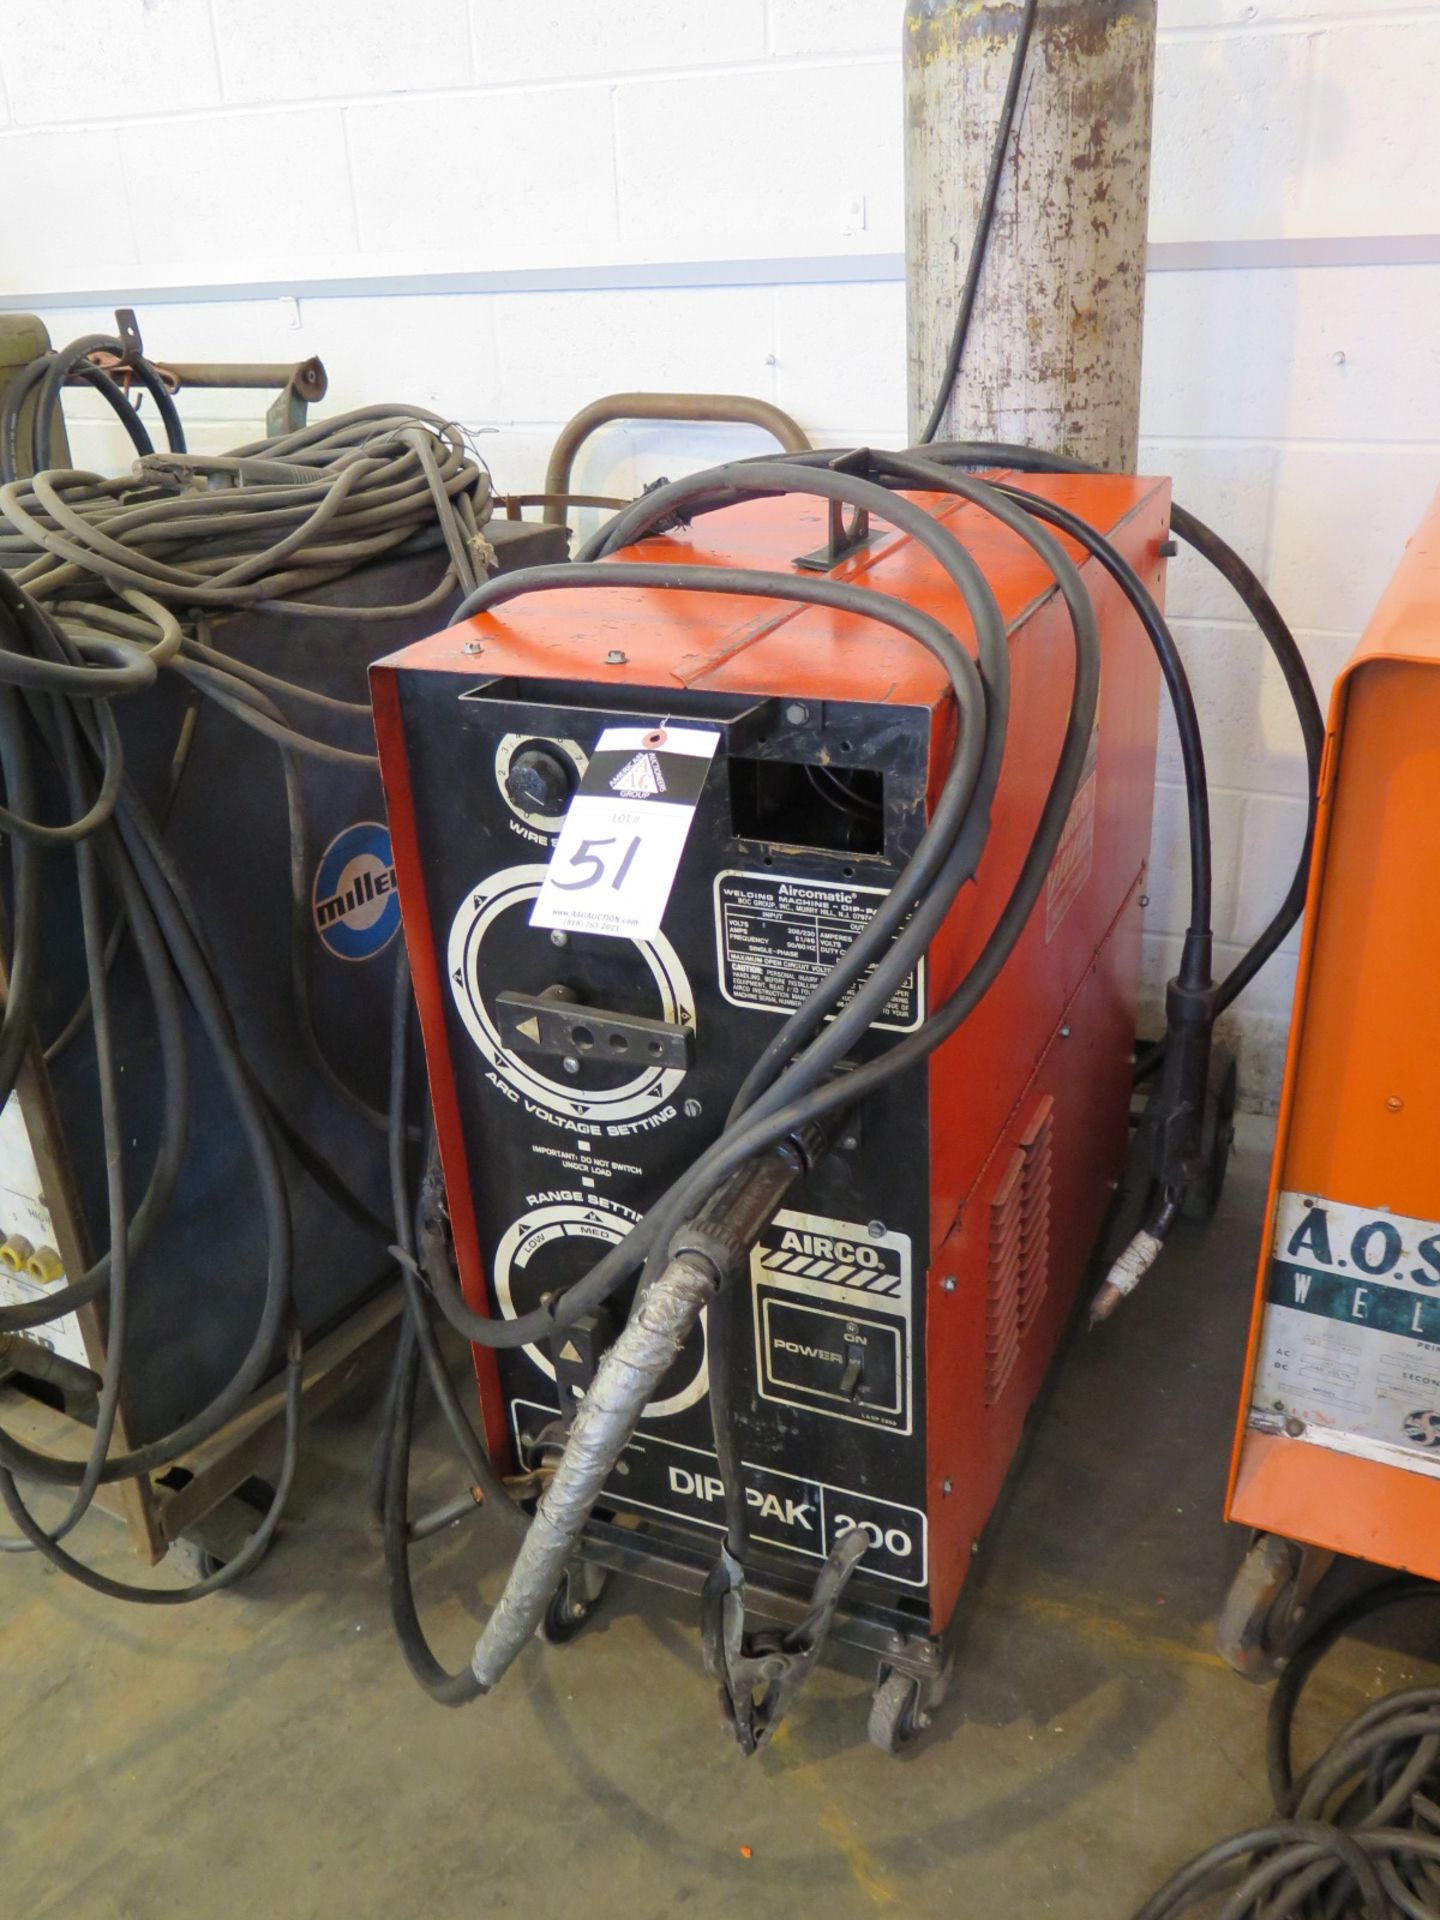 Airco Aircomatic PIP-PAK 200 Arc Welding Power Source and Wire Feeder - Image 2 of 2